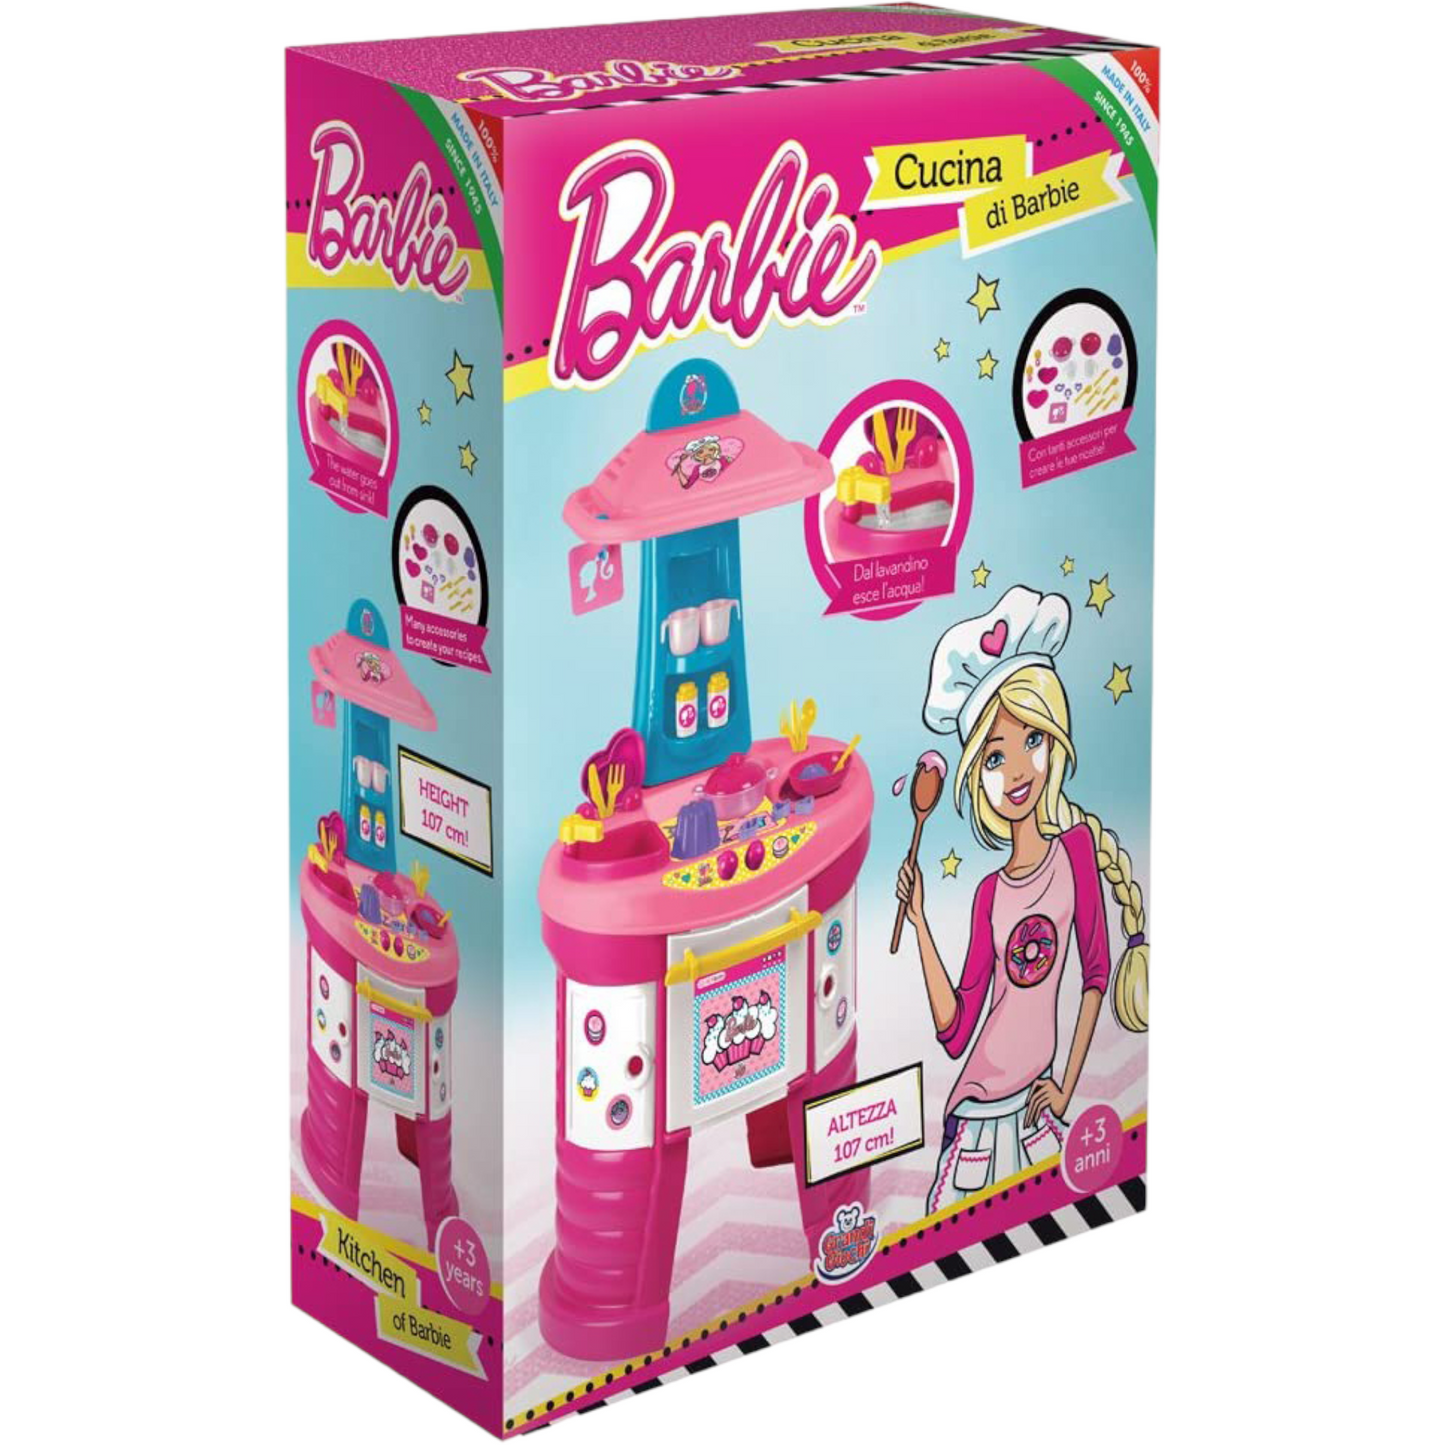 Barbie play set - kitchen and accessories, 107 cm, pink